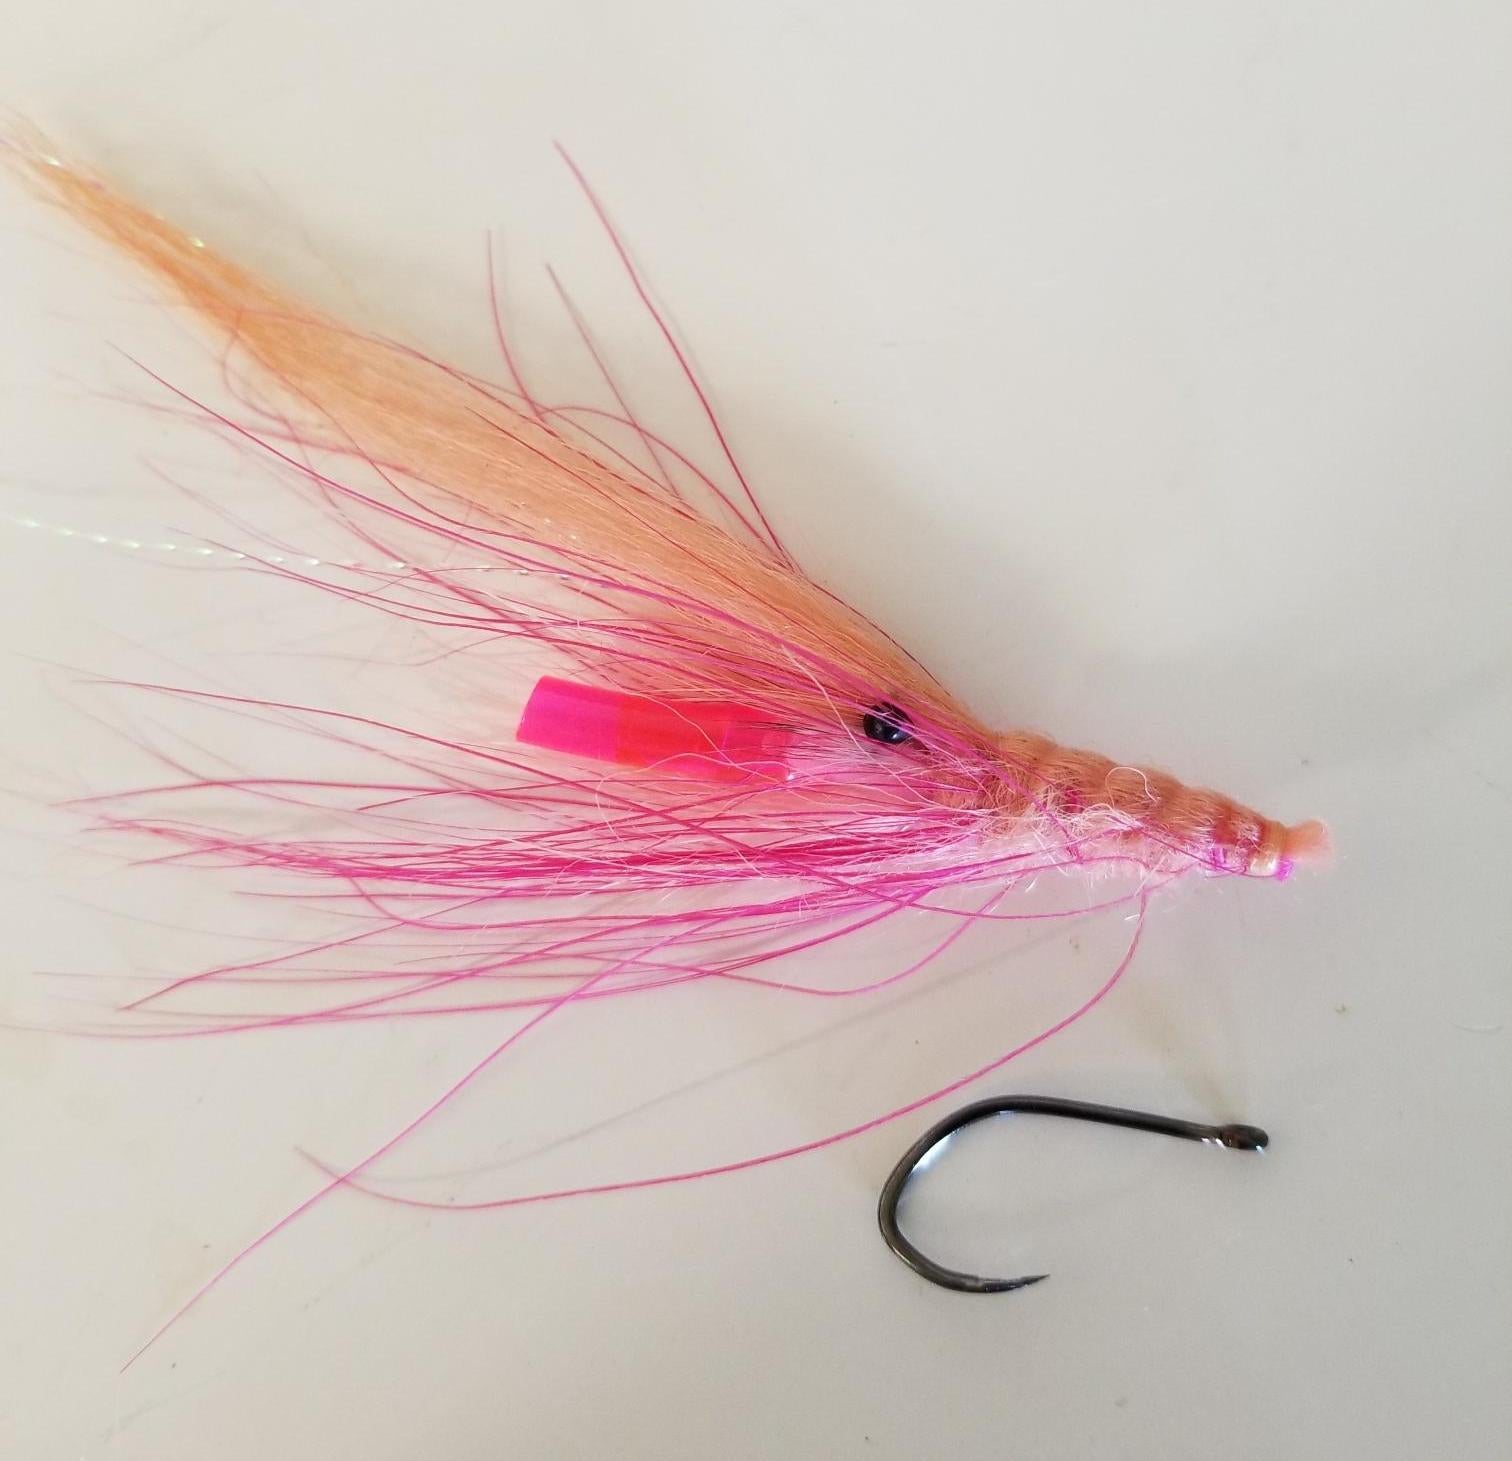 Barbless Bead, Tube Fly, and Intruder Hook – Angler Innovations